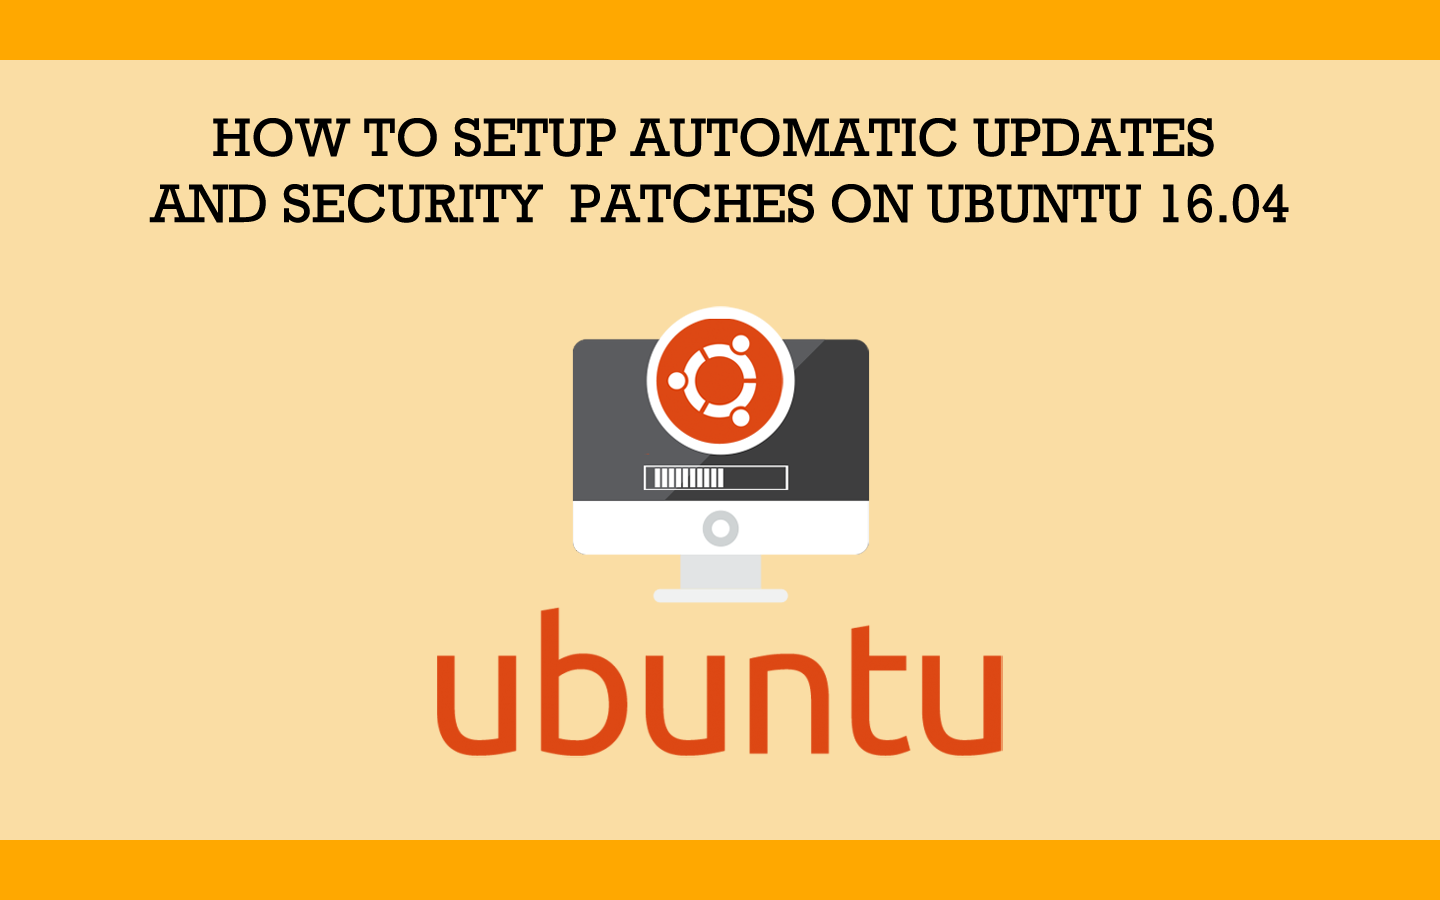 How To Setup Automatic Updates and Security Patches on Ubuntu 16.04